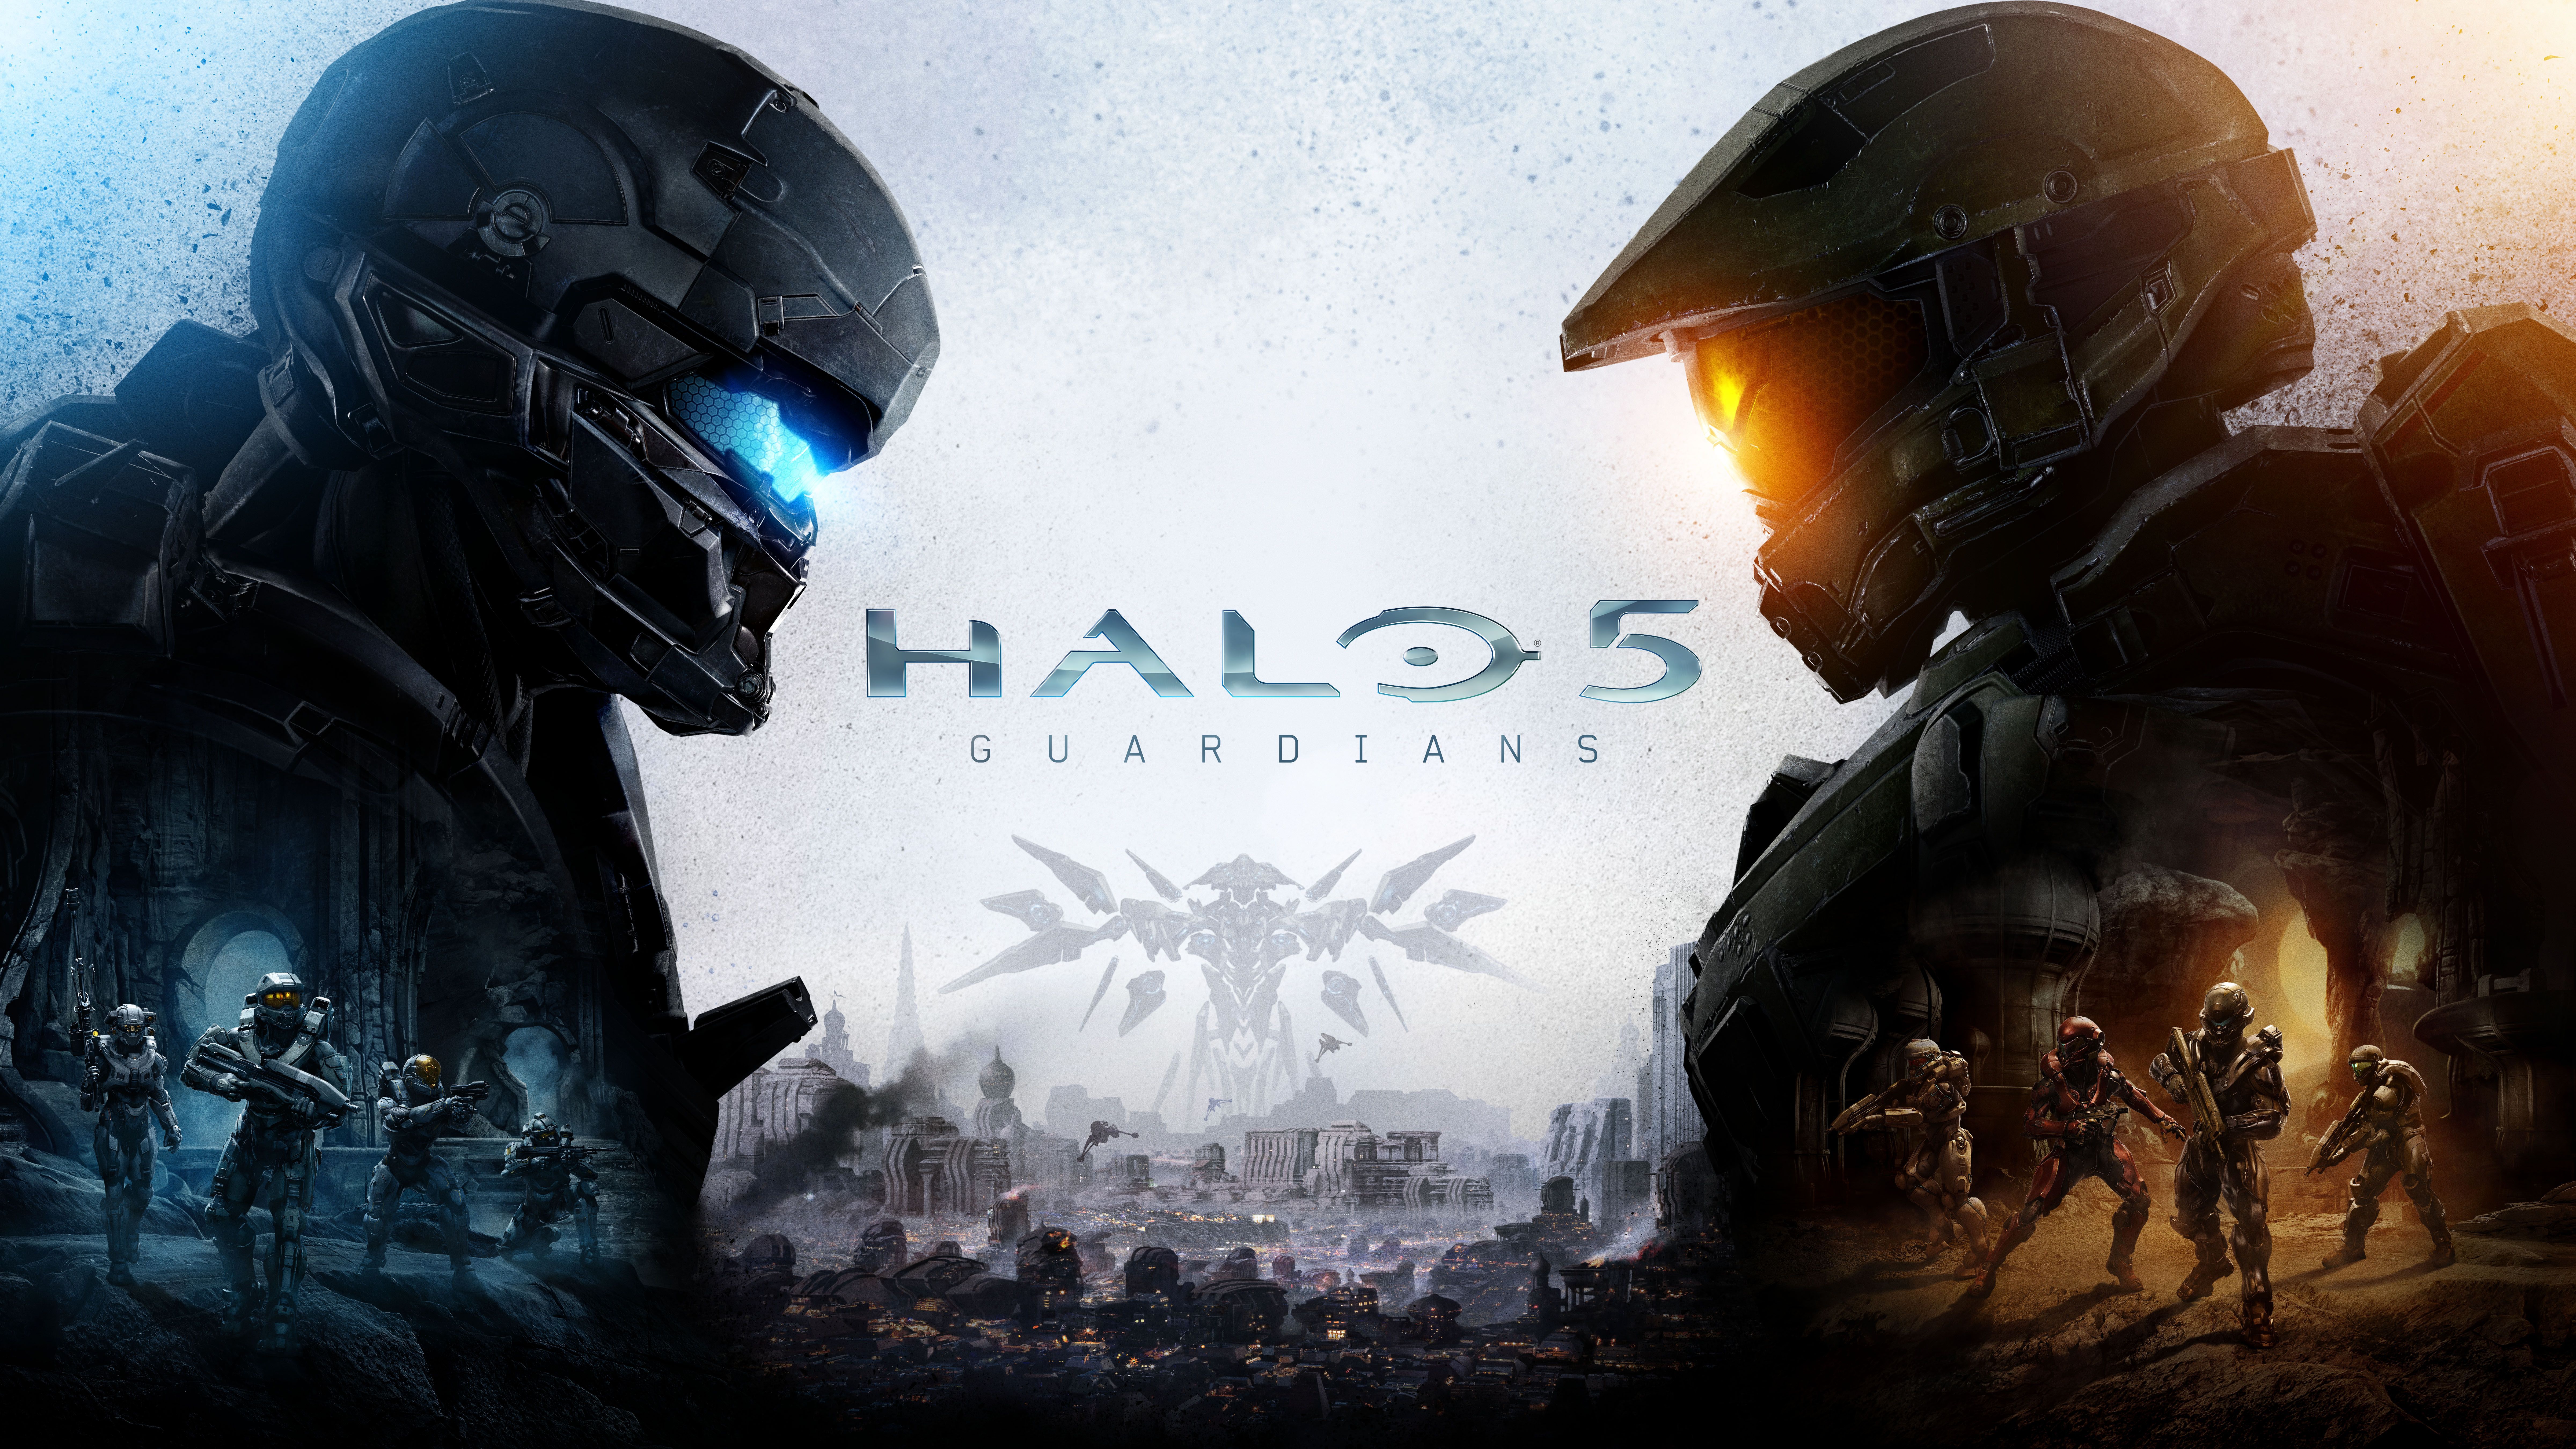 92 Halo 5: Guardians HD Wallpapers | Backgrounds - Wallpaper Abyss